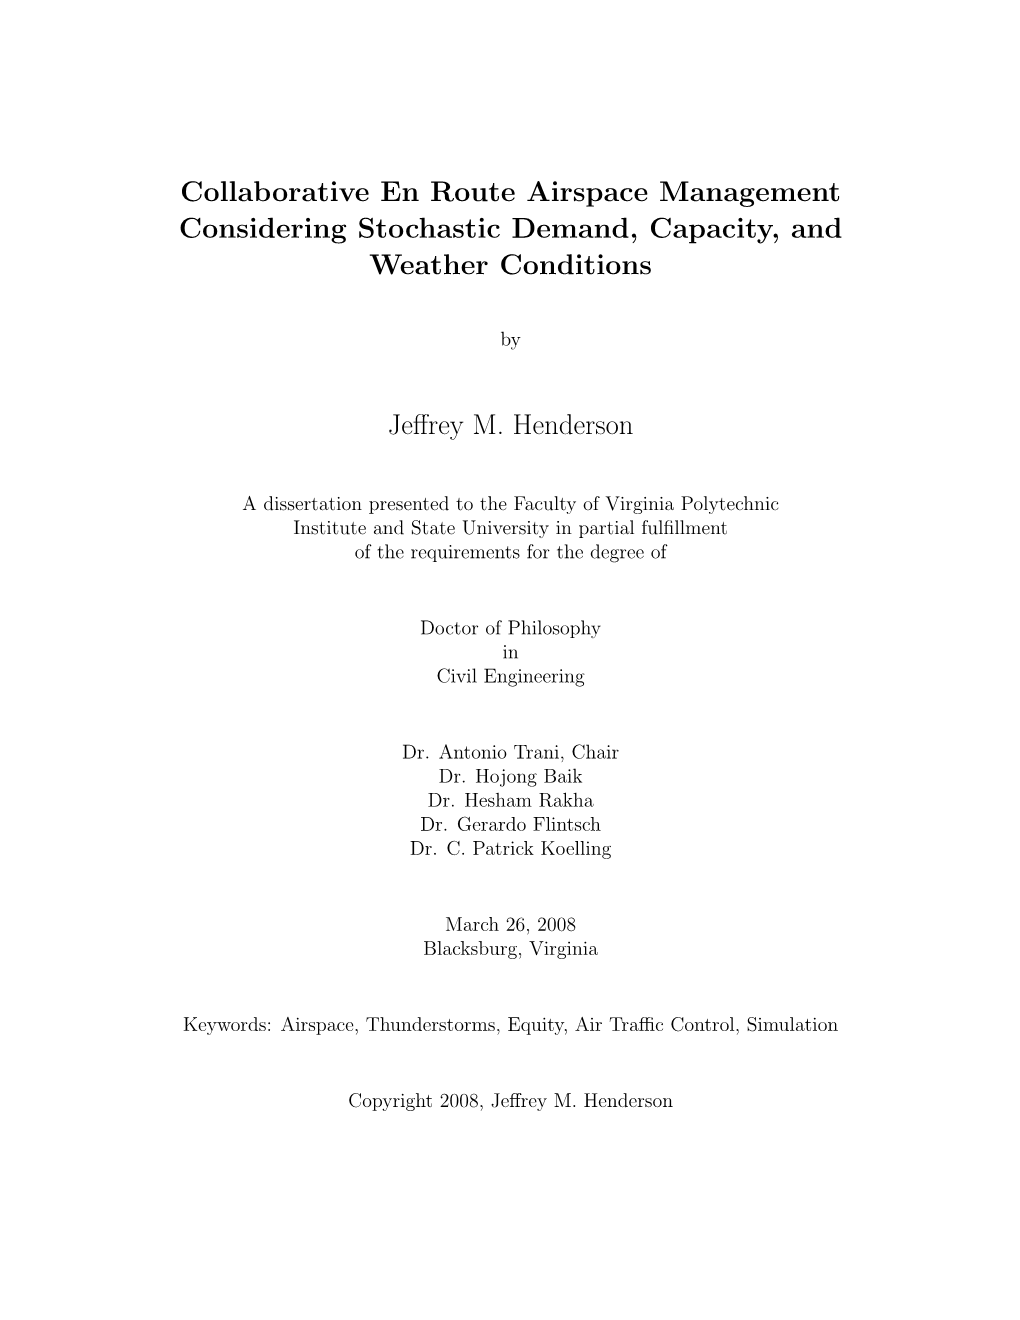 Collaborative En Route Airspace Management Considering Stochastic Demand, Capacity, and Weather Conditions